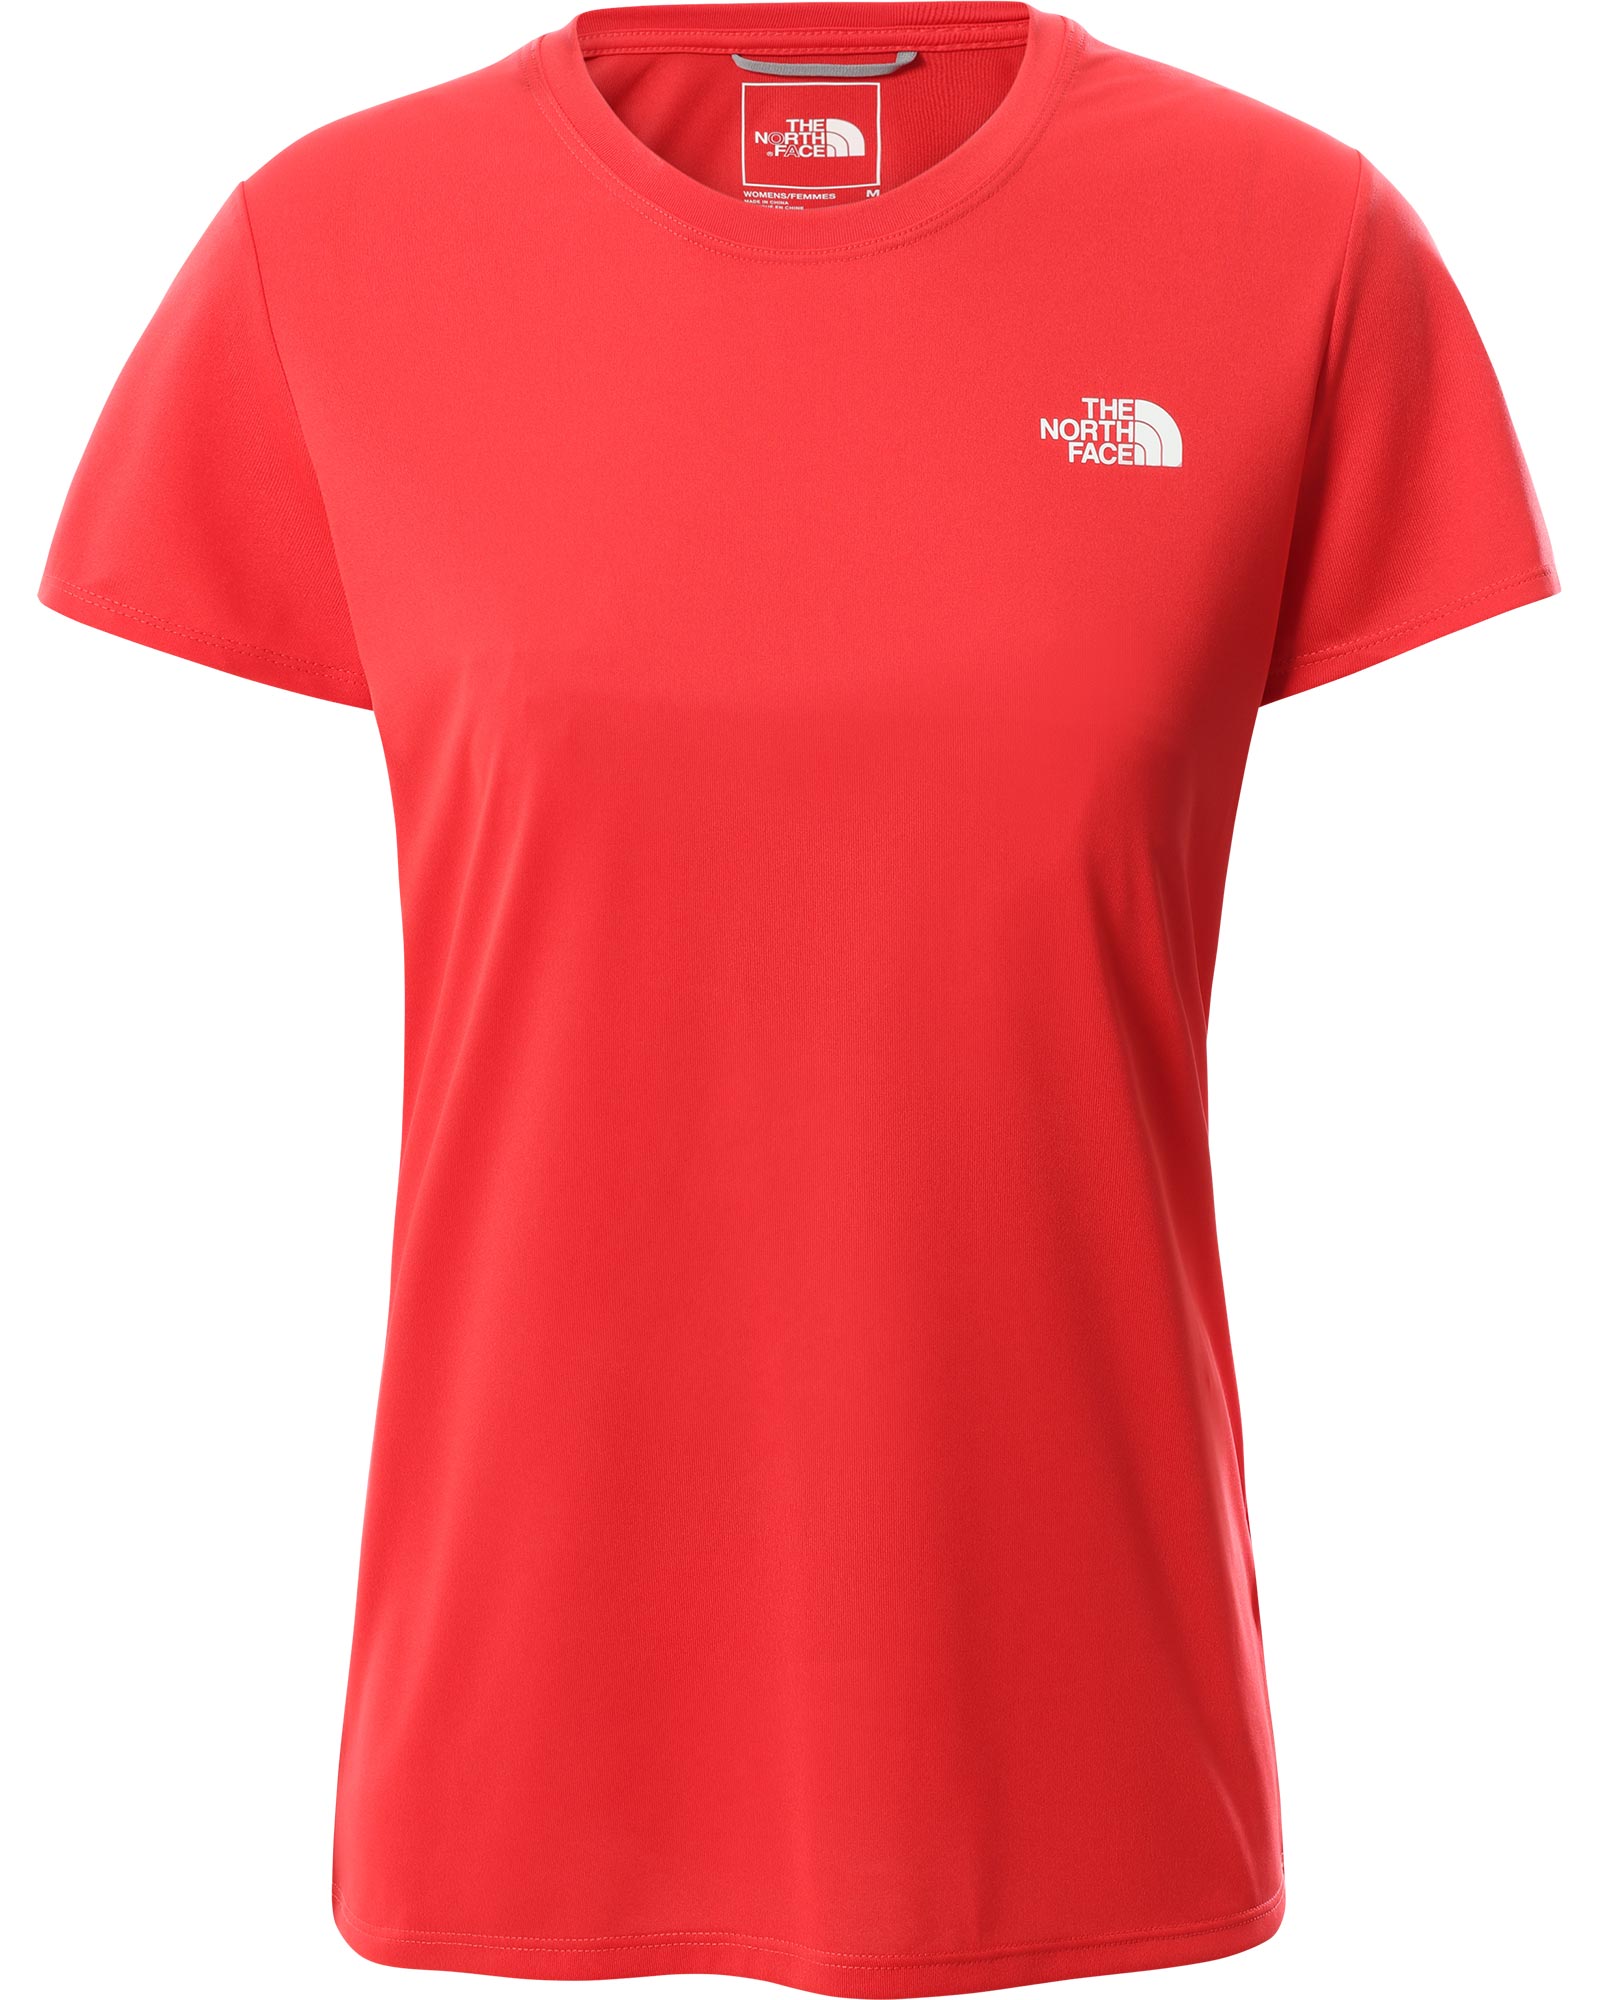 The North Face Reaxion Amp Women’s Crew T Shirt - Horizon Red L